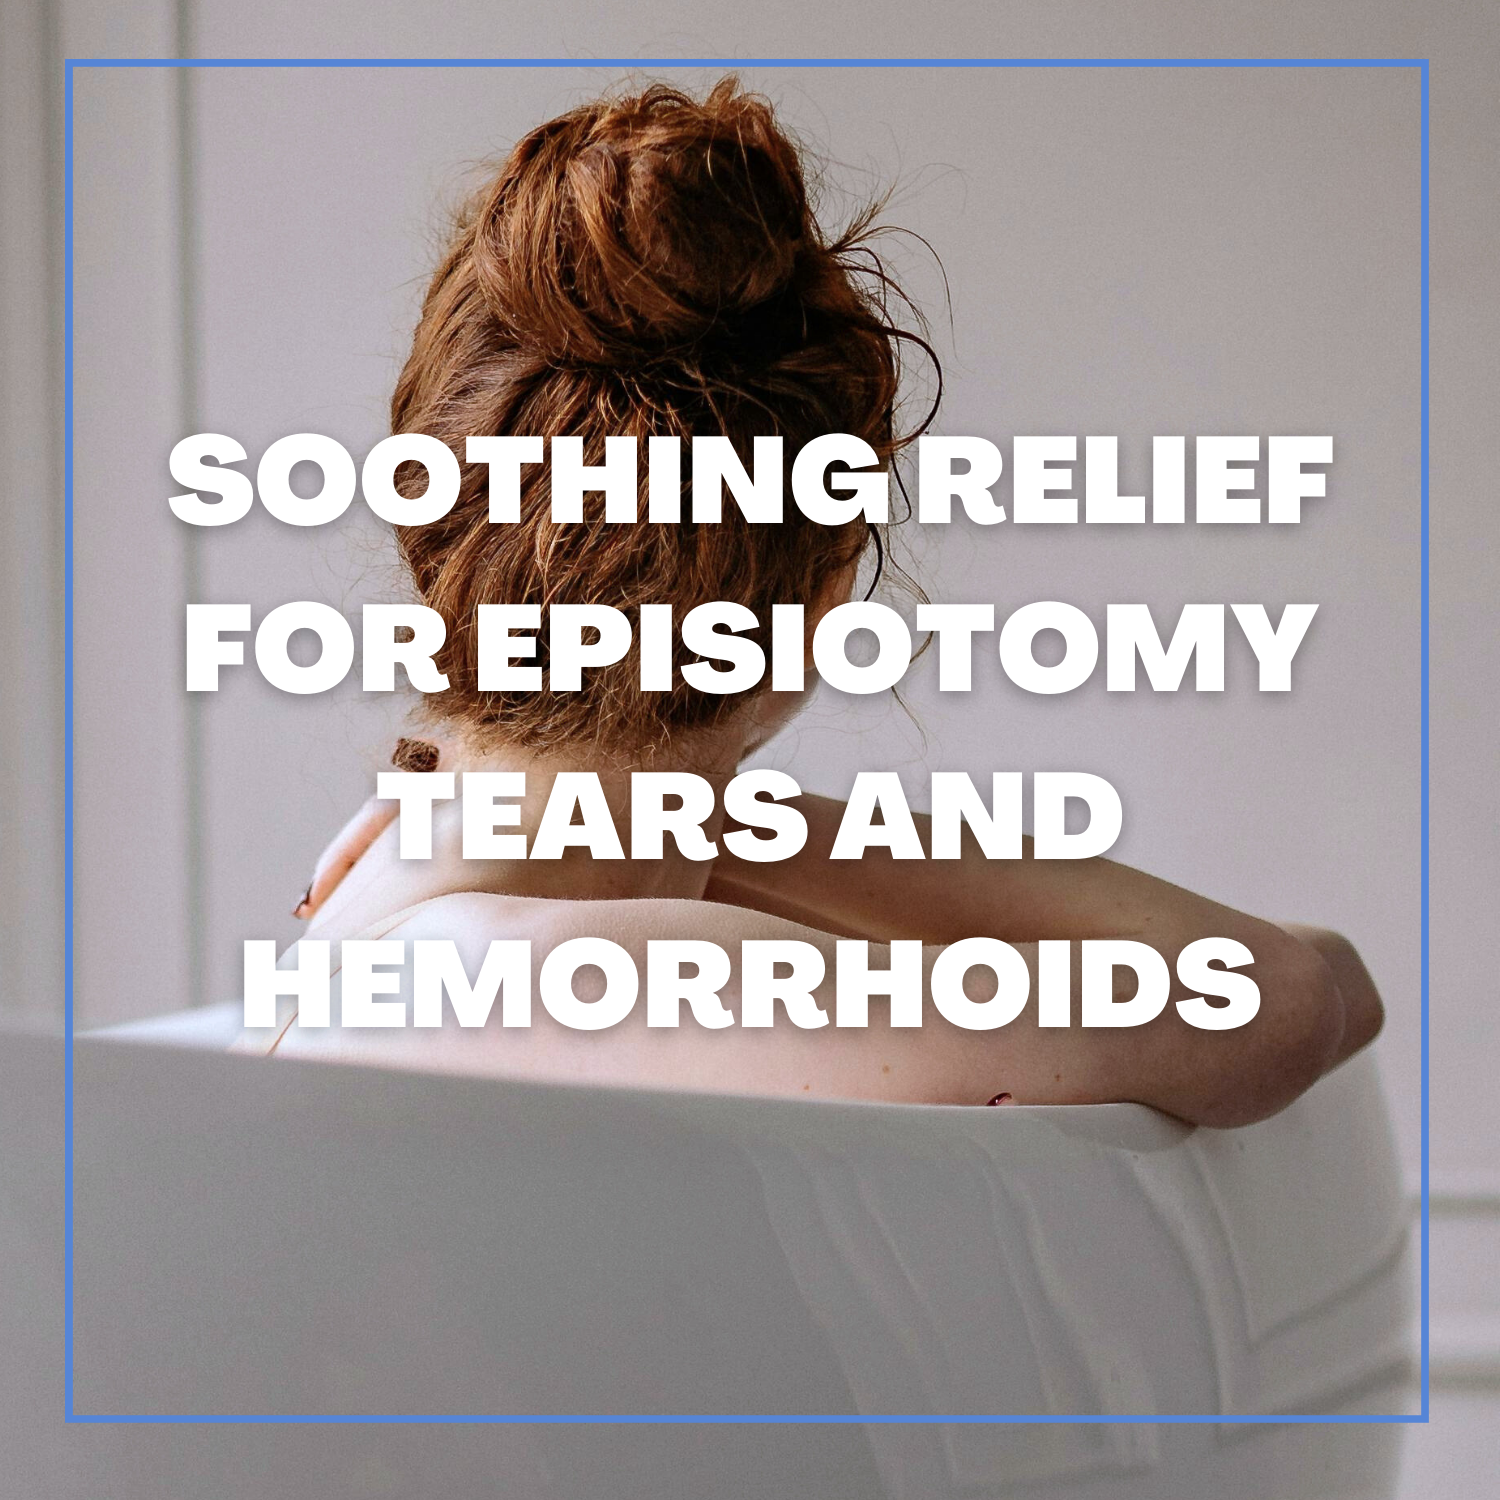  sooth episiotomy, vaginal tears, and hemorrhoids